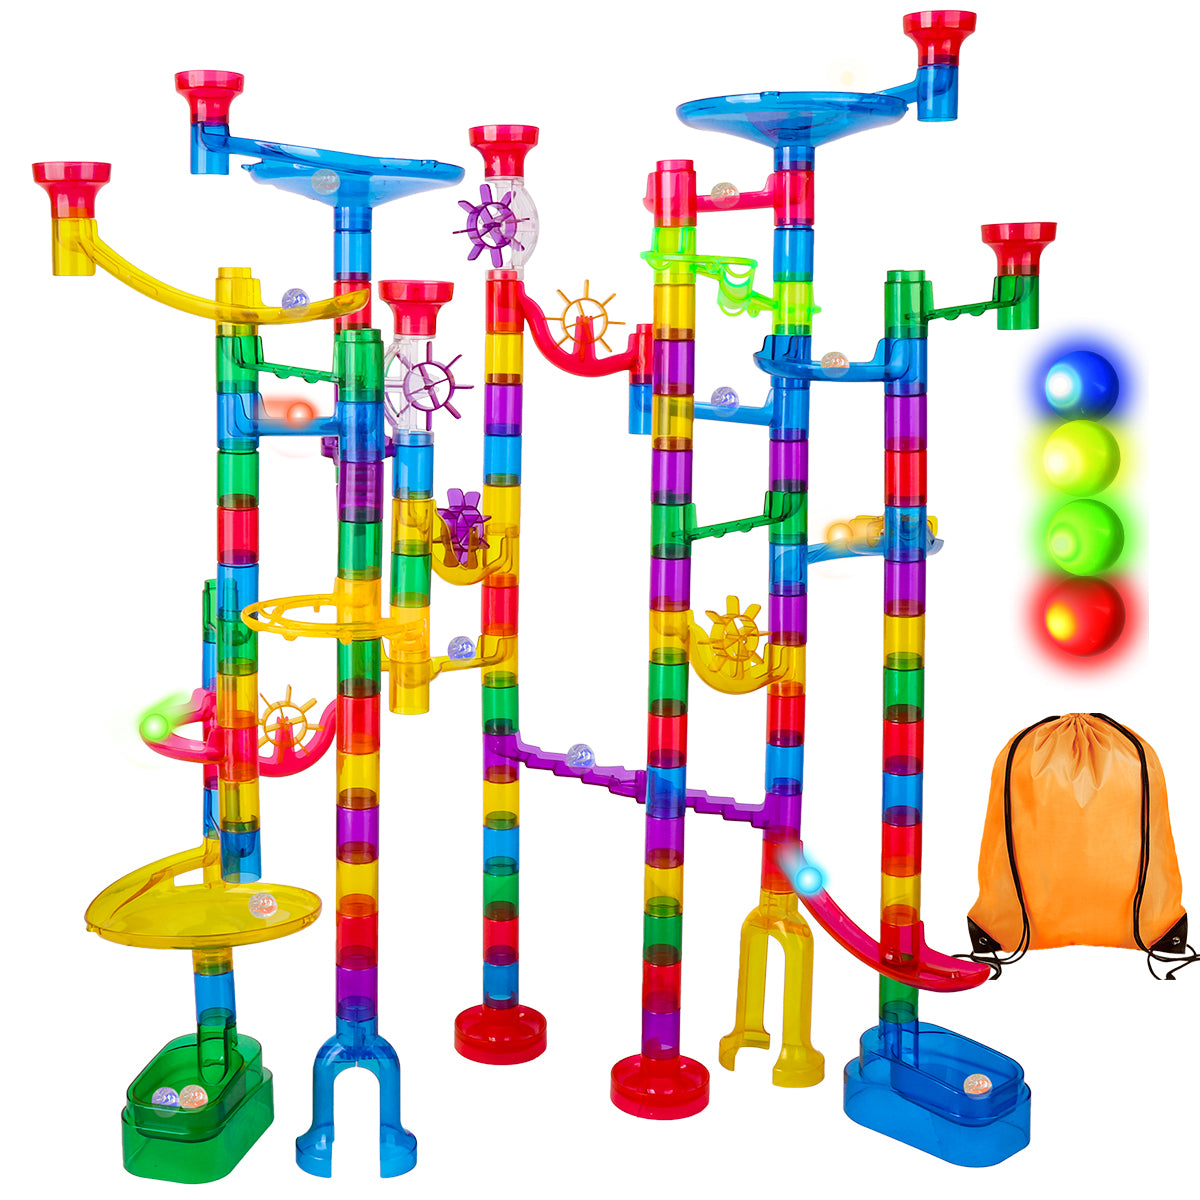 142 Piece Marble Run Toy Set with LED Lighted Marbles